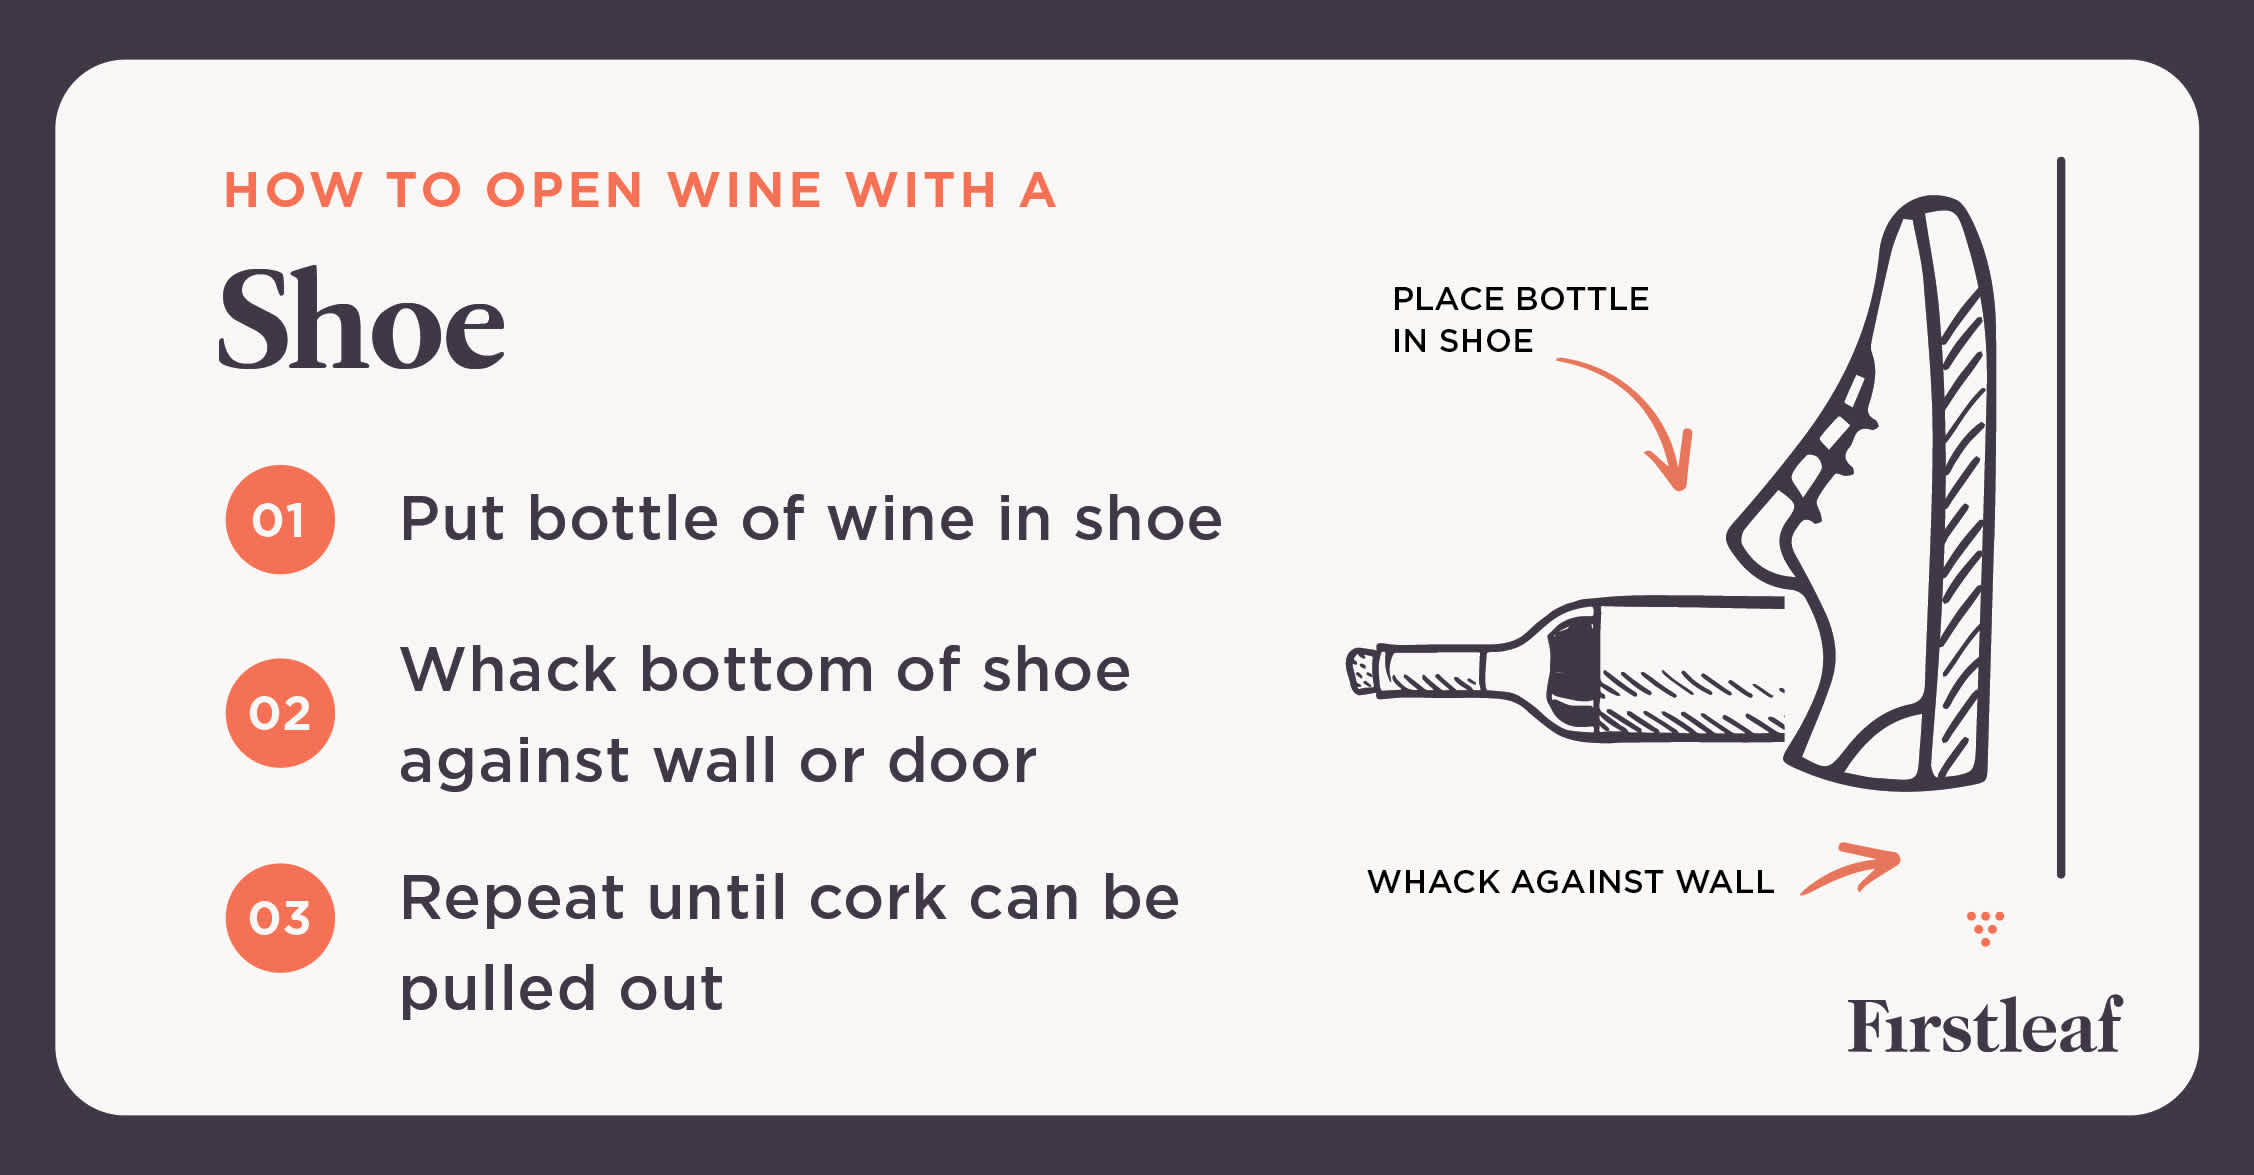 How to Open Wine with a Shoe